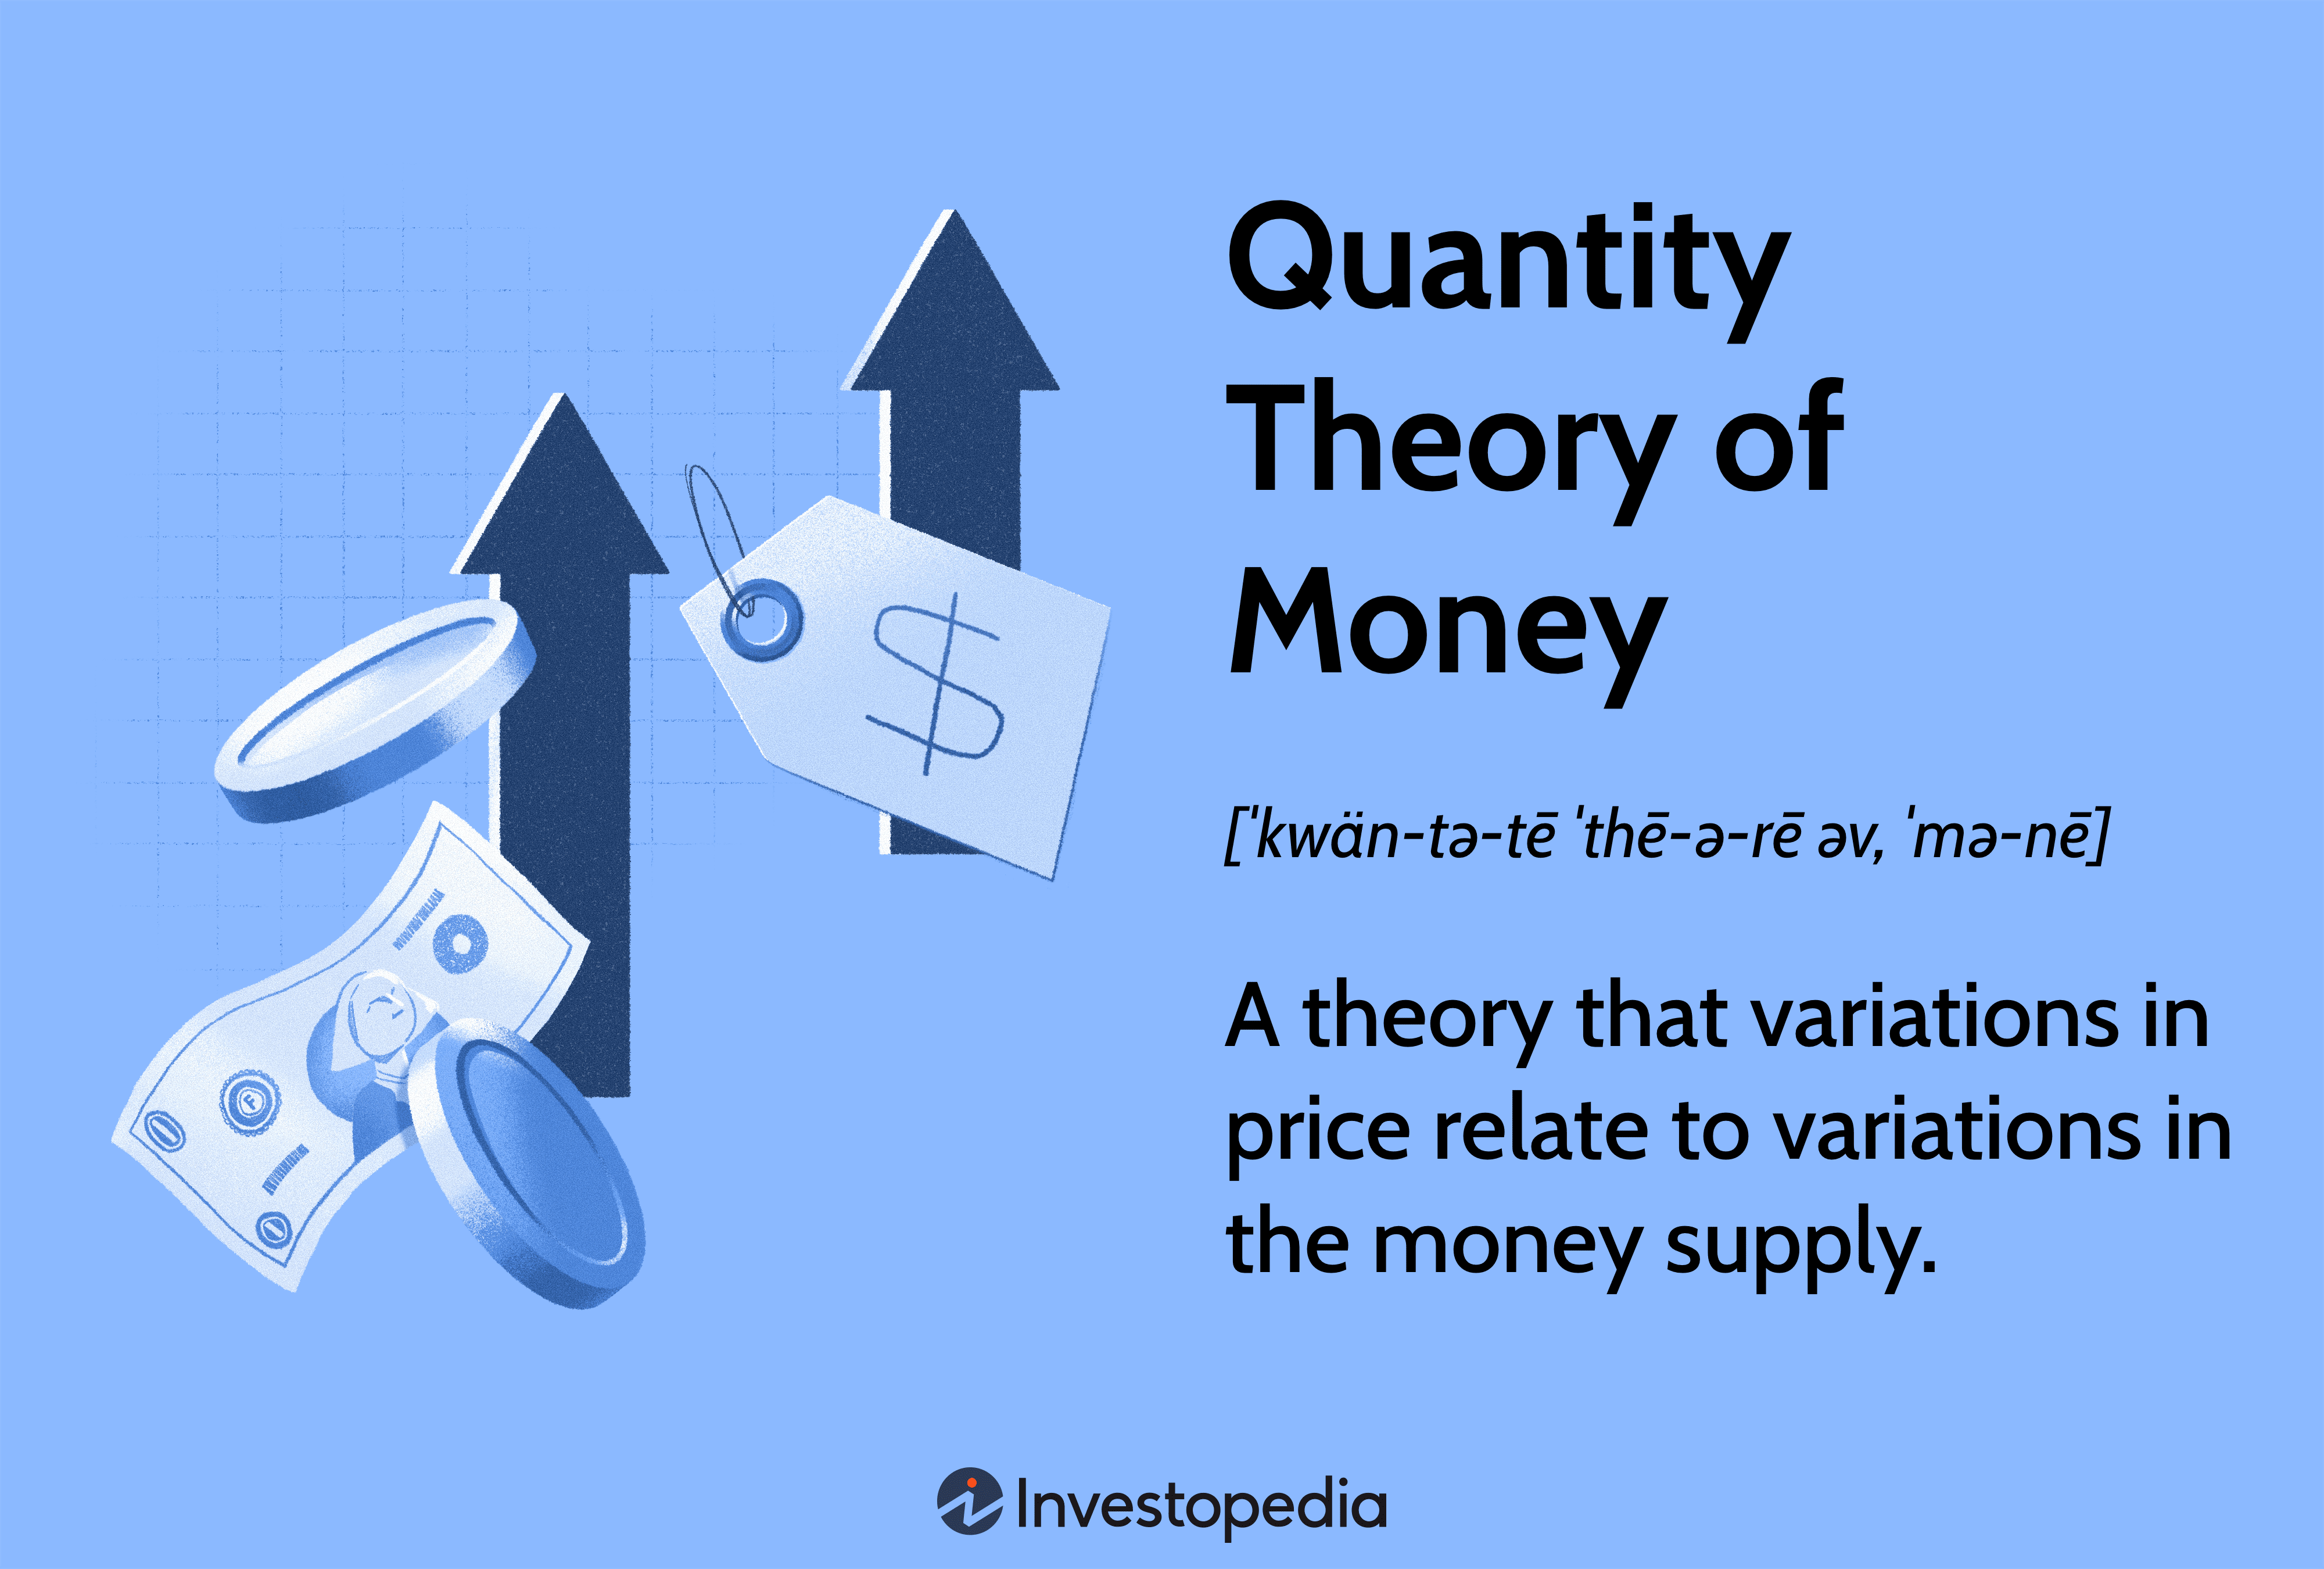 Quantity Theory of Money: A theory that variations in price relate to variations in the money supply.